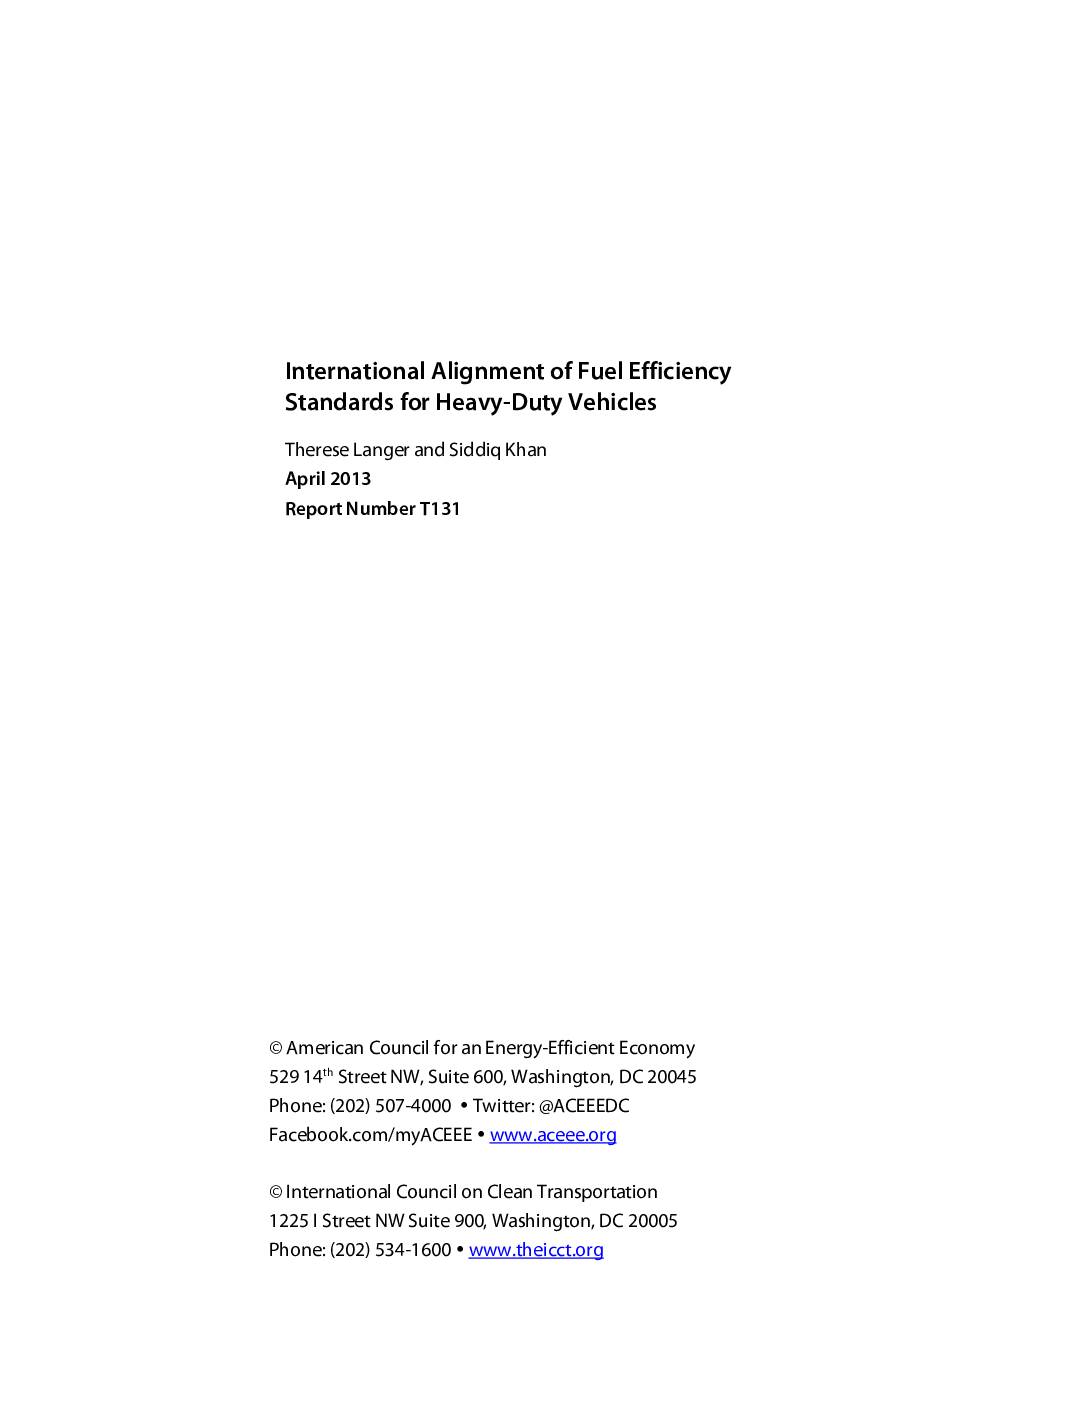 International Alignment of Fuel Efficiency Standards for Heavy-Duty Vehicles